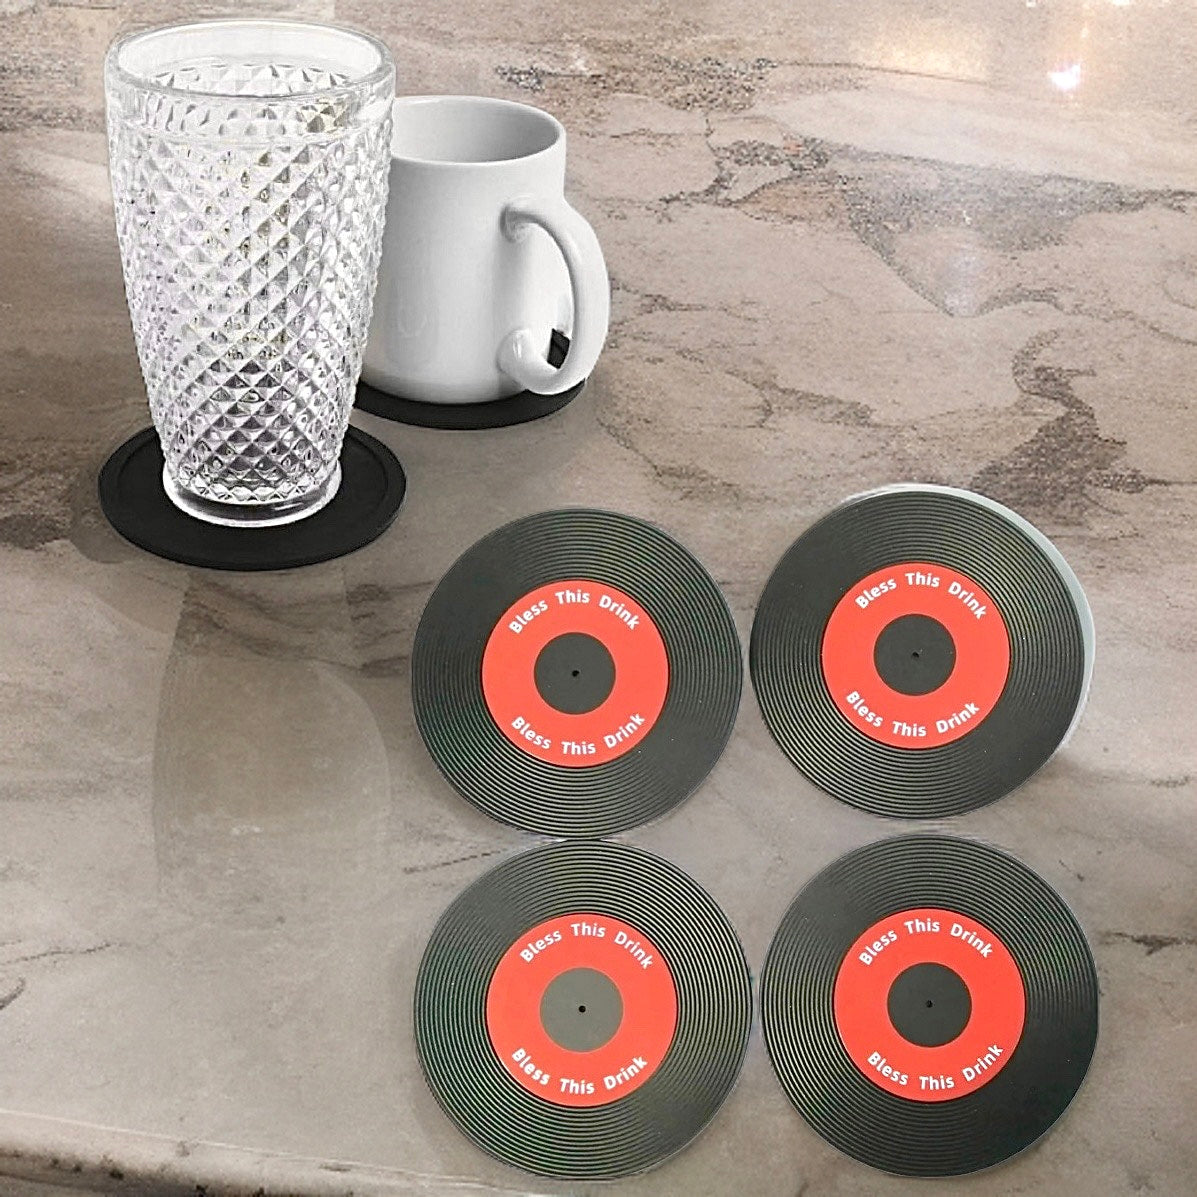 4 Piece Set “Blessed This Drink” Silicone Coasters